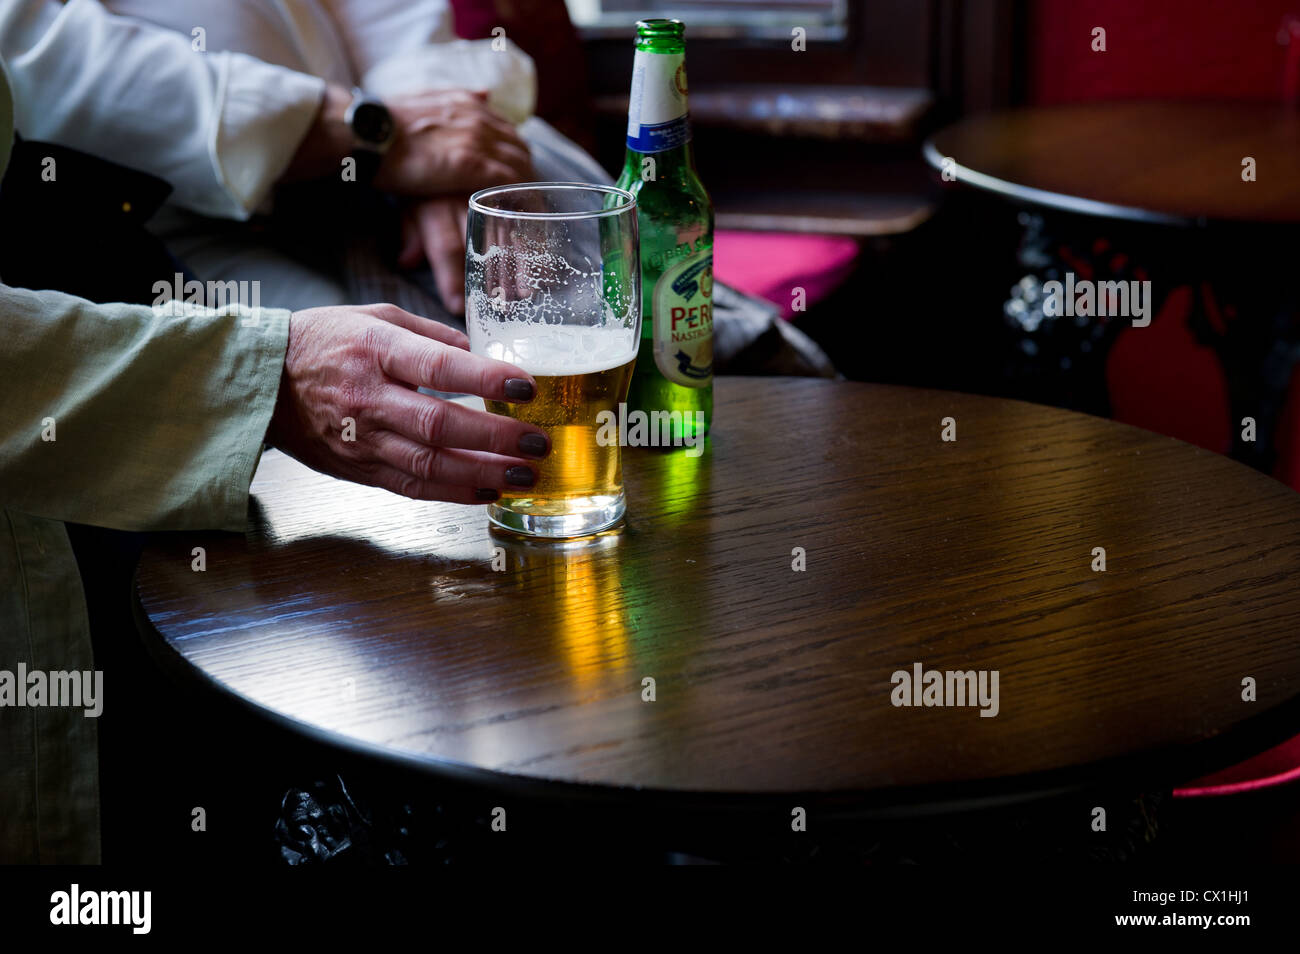 A hand rraching for a pint glass Stock Photo